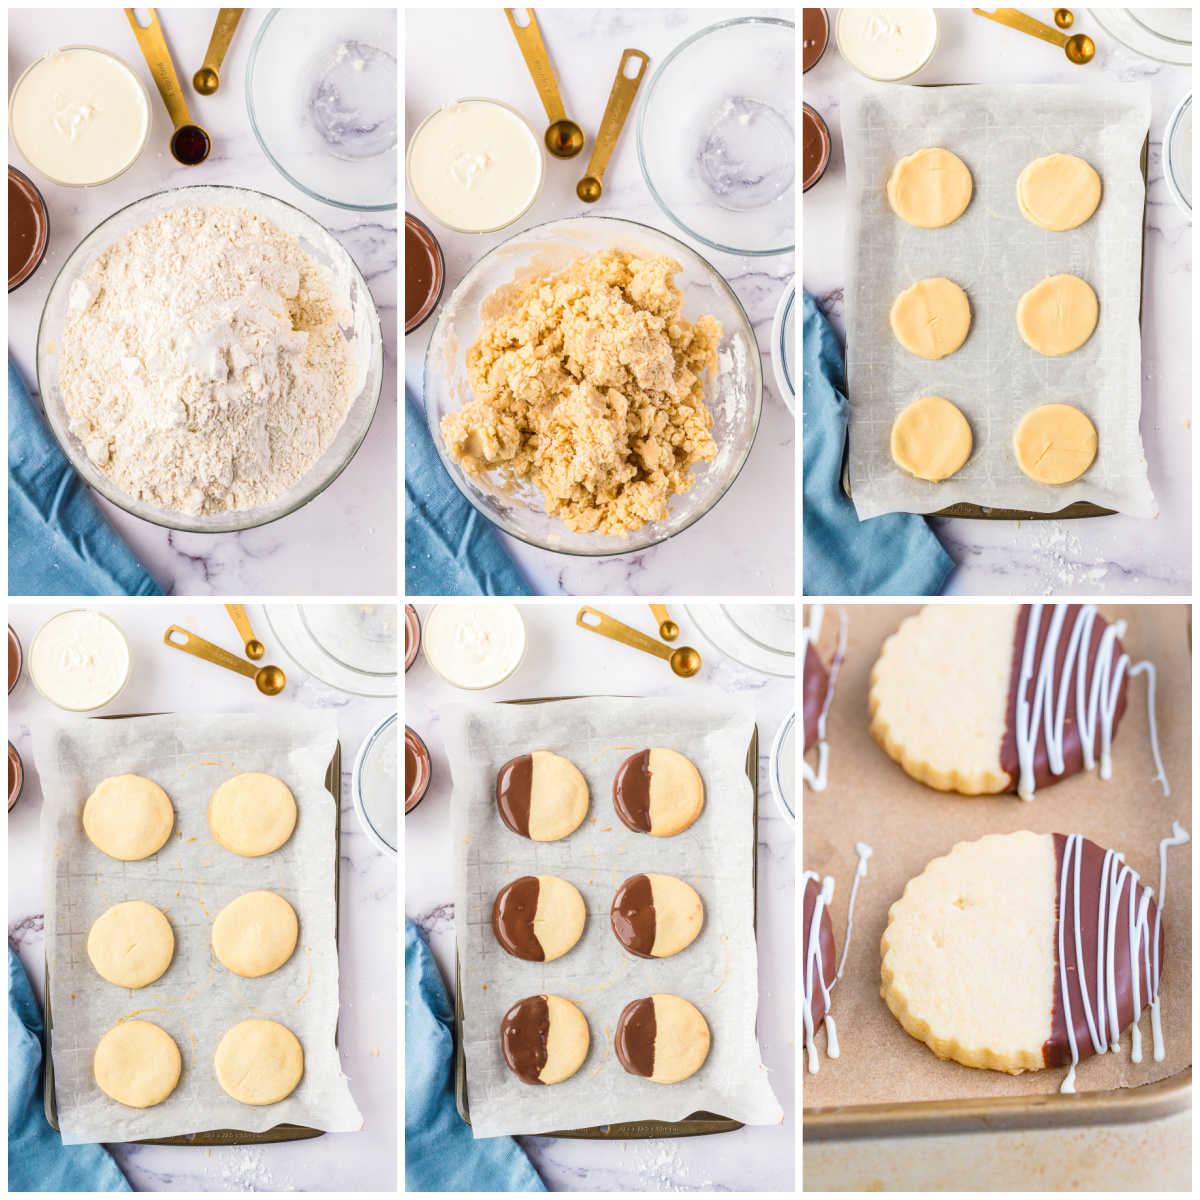 Step by step photos on how to make Chocolate Dipped Shortbread Cookies.